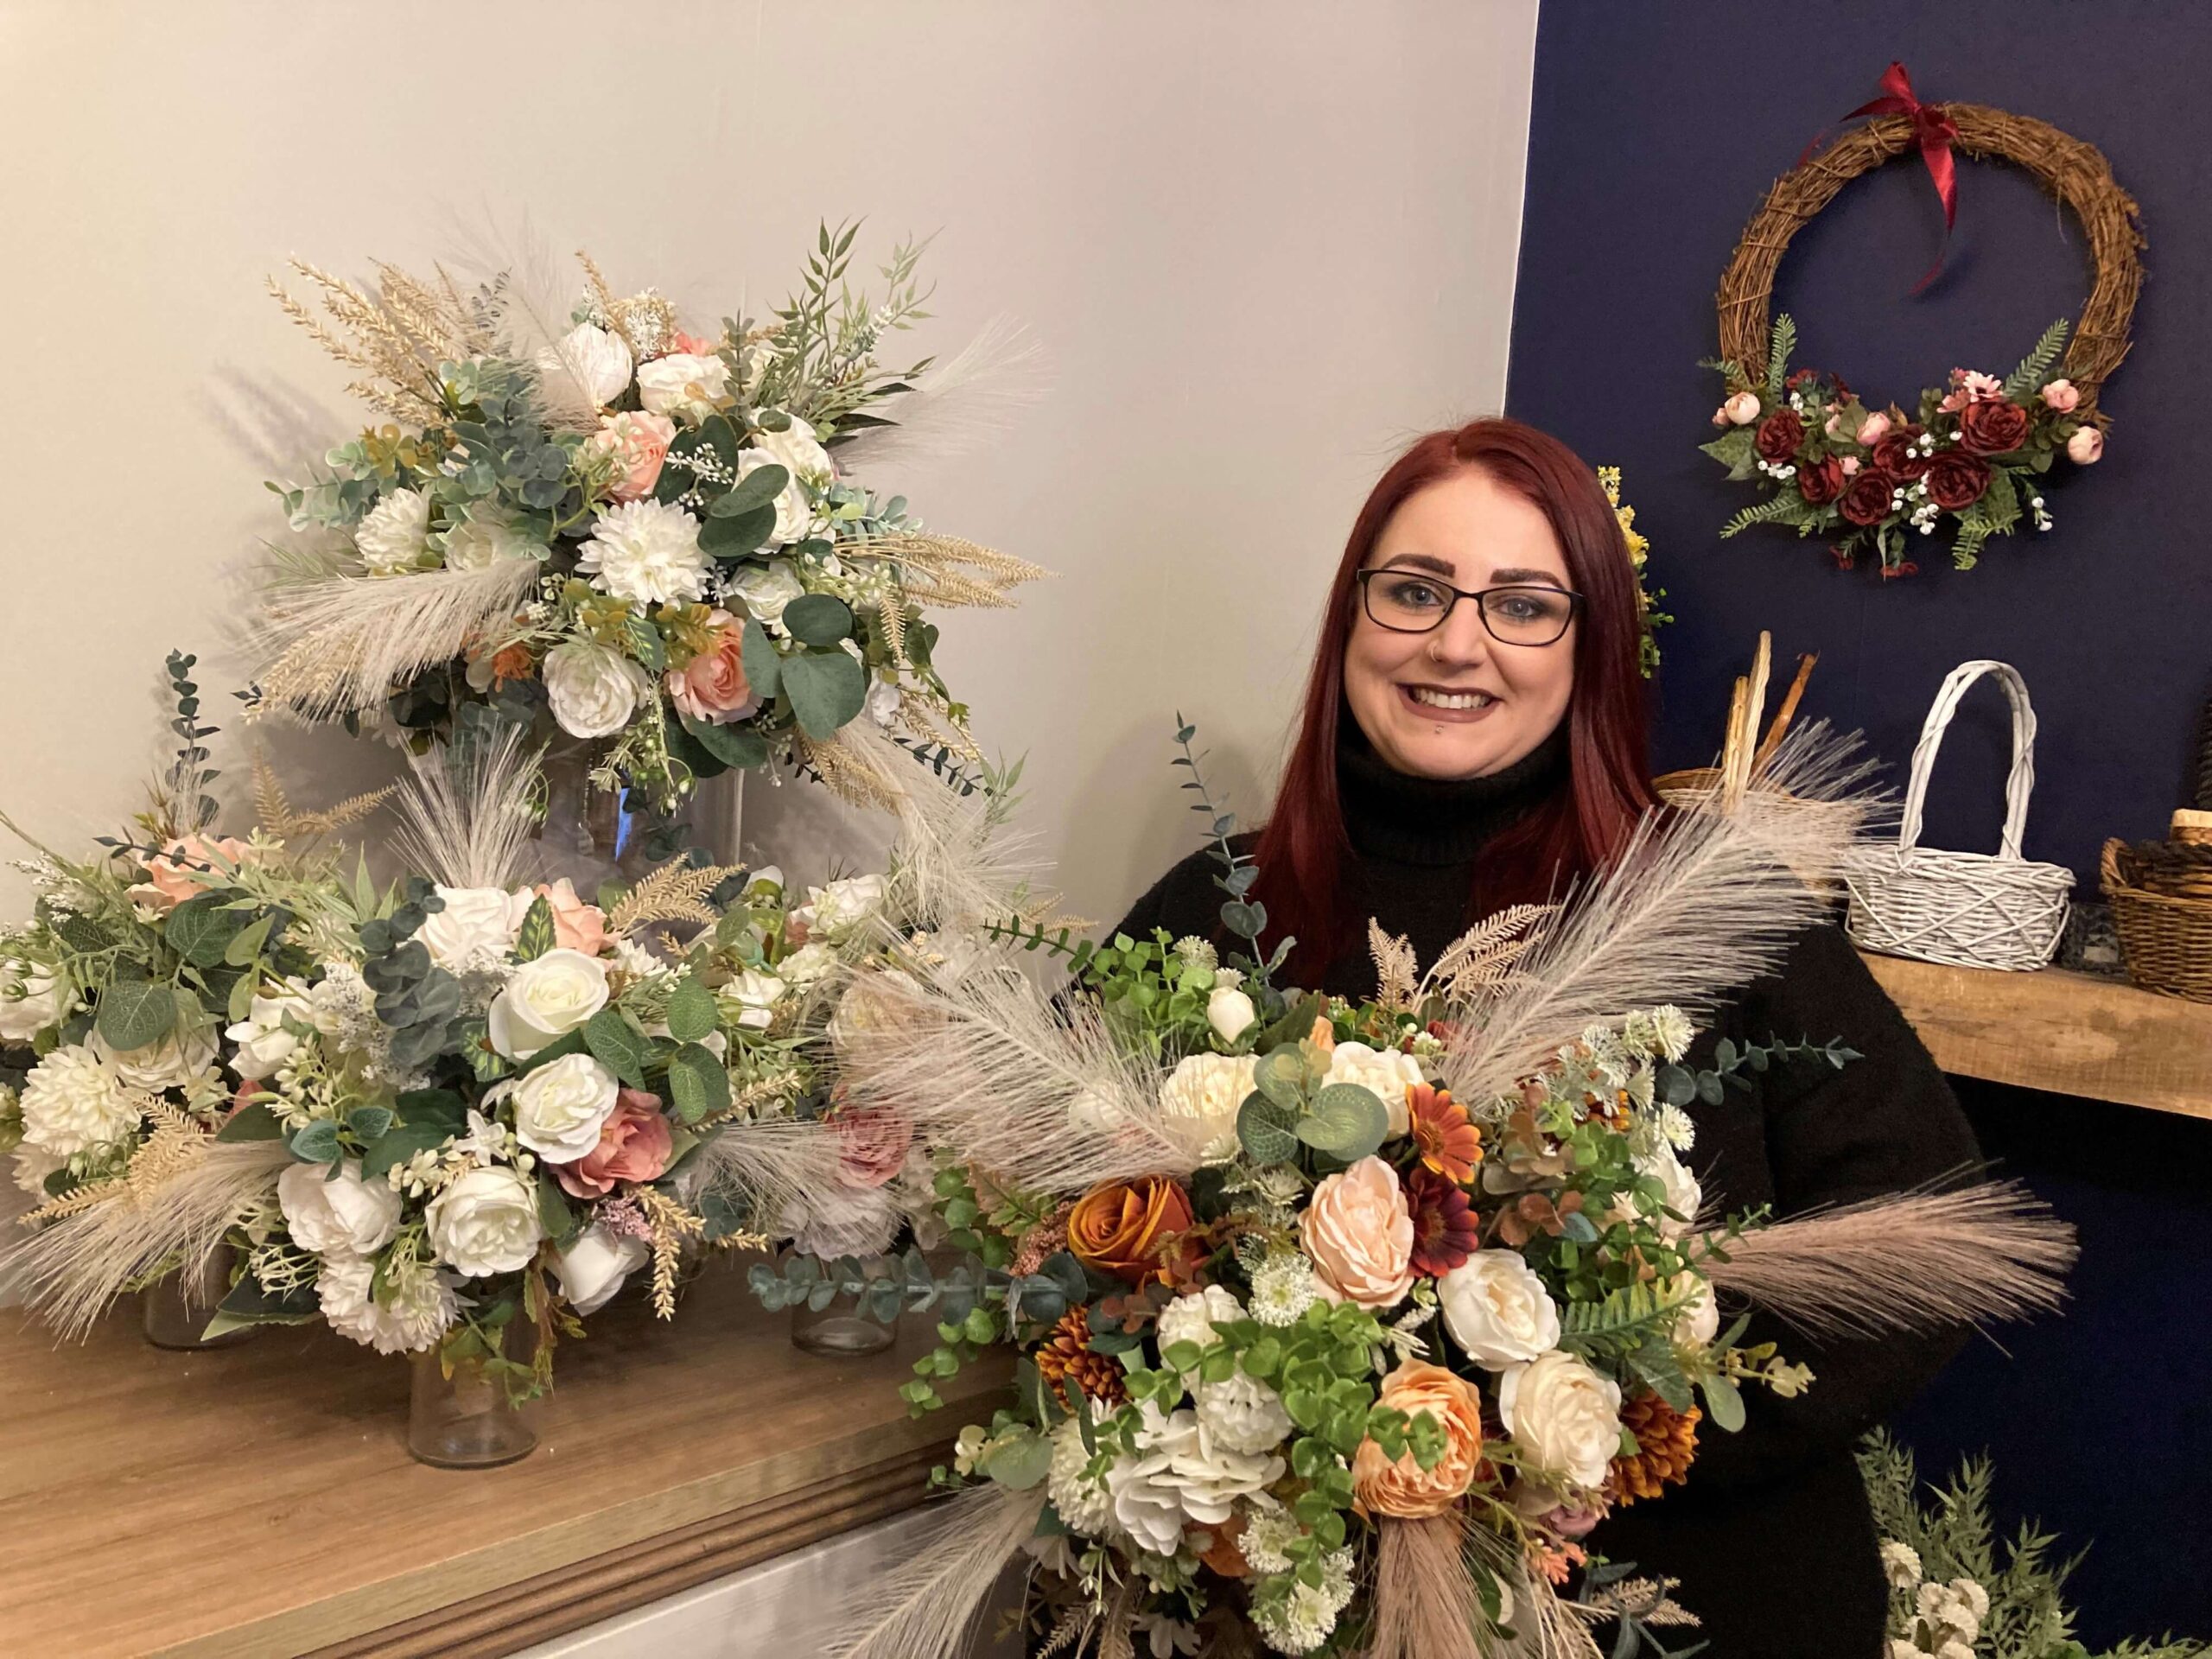 Marie’s floristry future is blooming after help from Derventio featured image